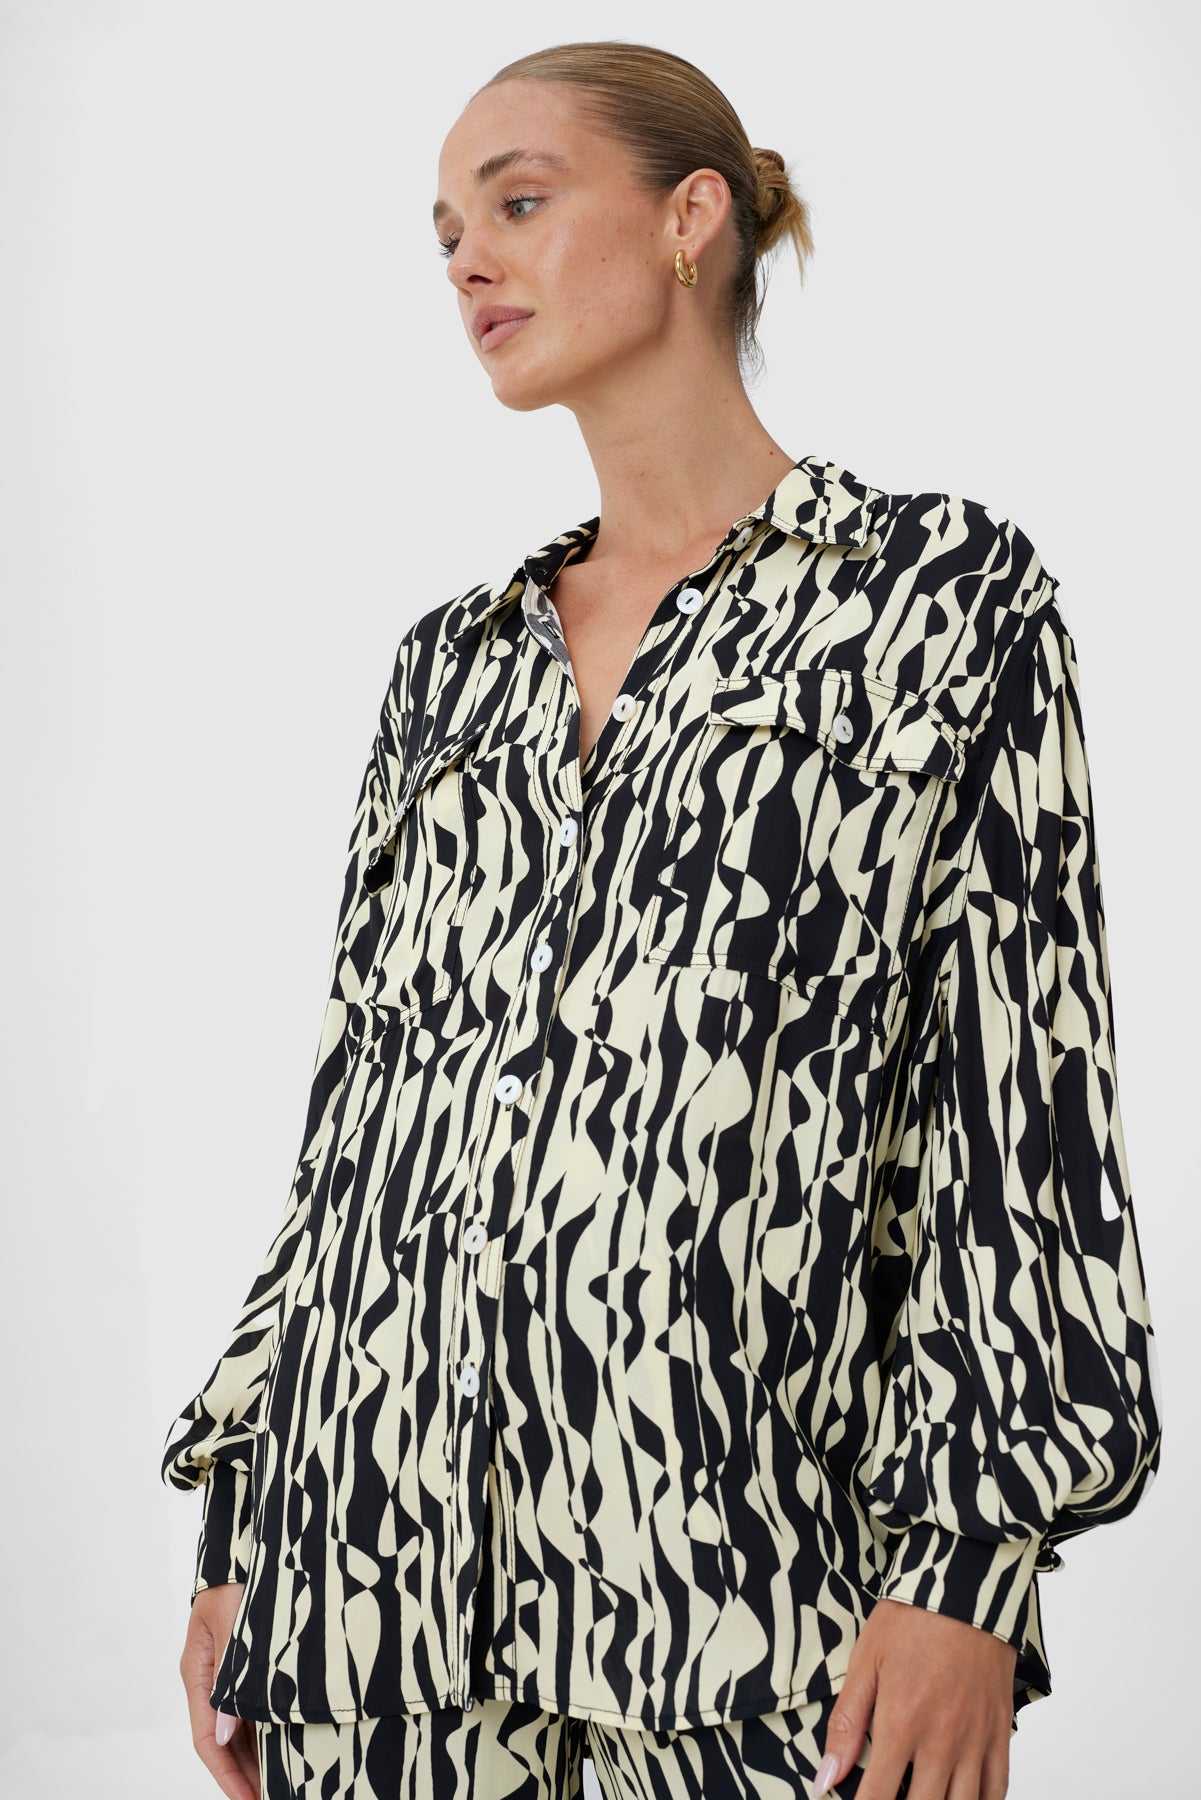 C/MEO Collective - Nothing Less Shirt - Shapes Print